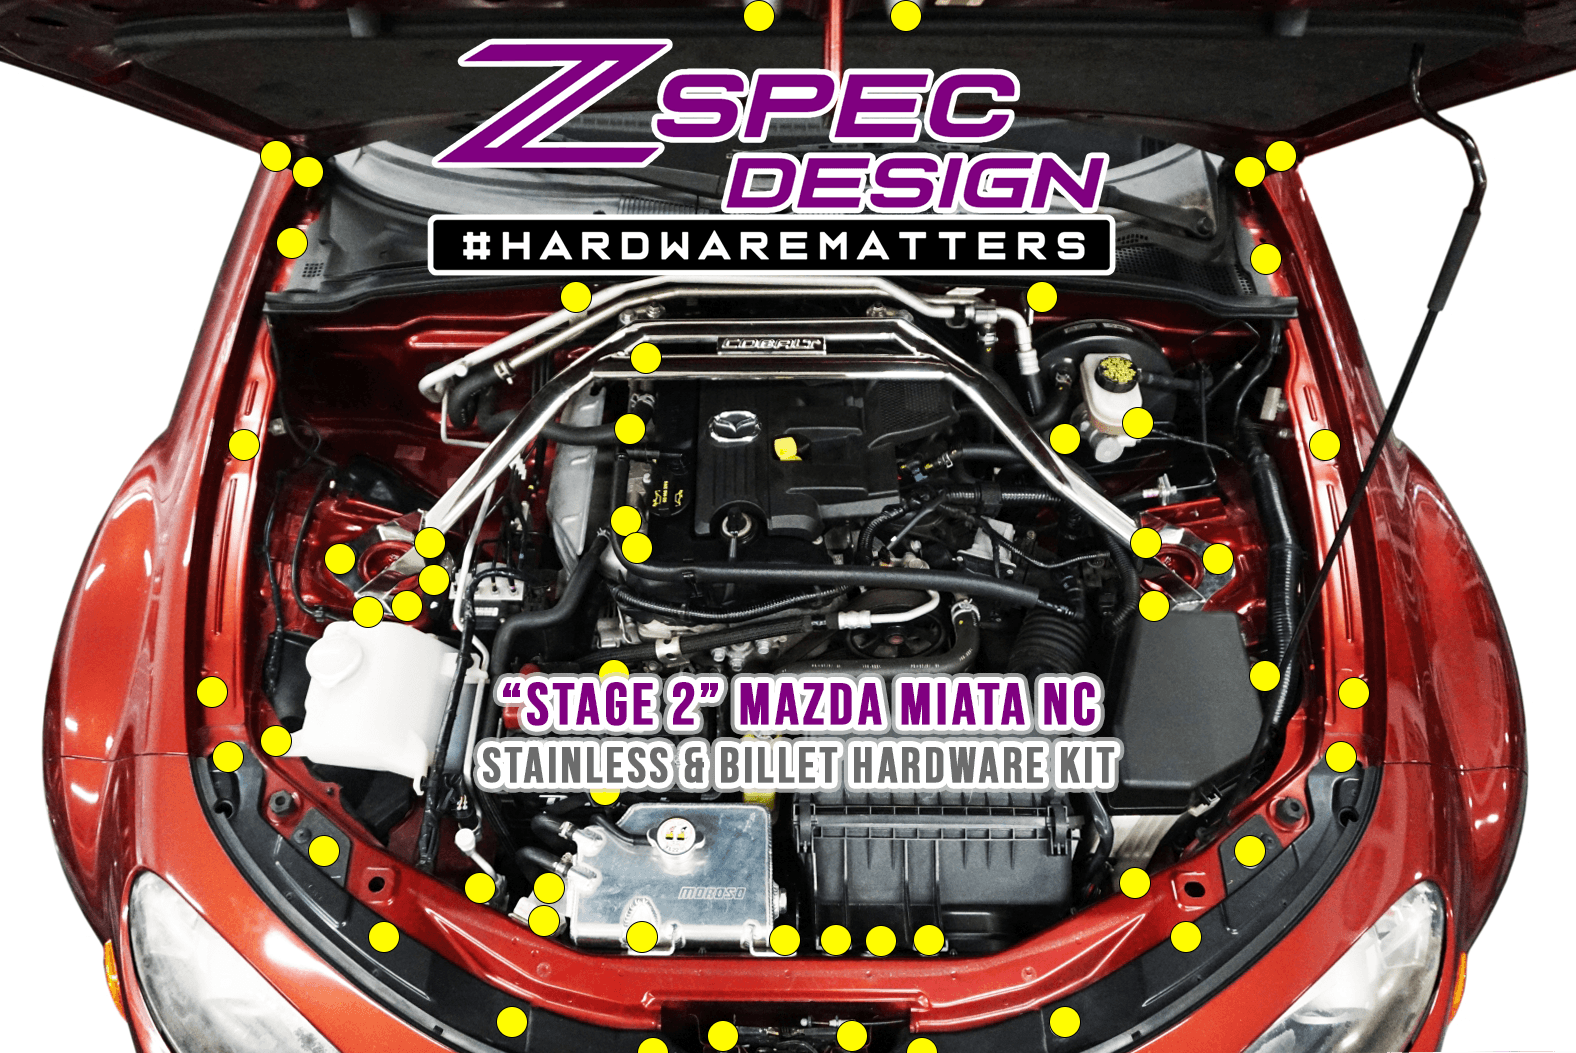 ZSPEC "Stage 3" Dress Up Bolts® Fastener Kit for Mazda Miata NC, Stainless & Billet  SUS304 Stainless Hardware Fasteners & Billet Aluminum Colored Finish Washers, Bagged & Labeled by Area ZSPEC Design